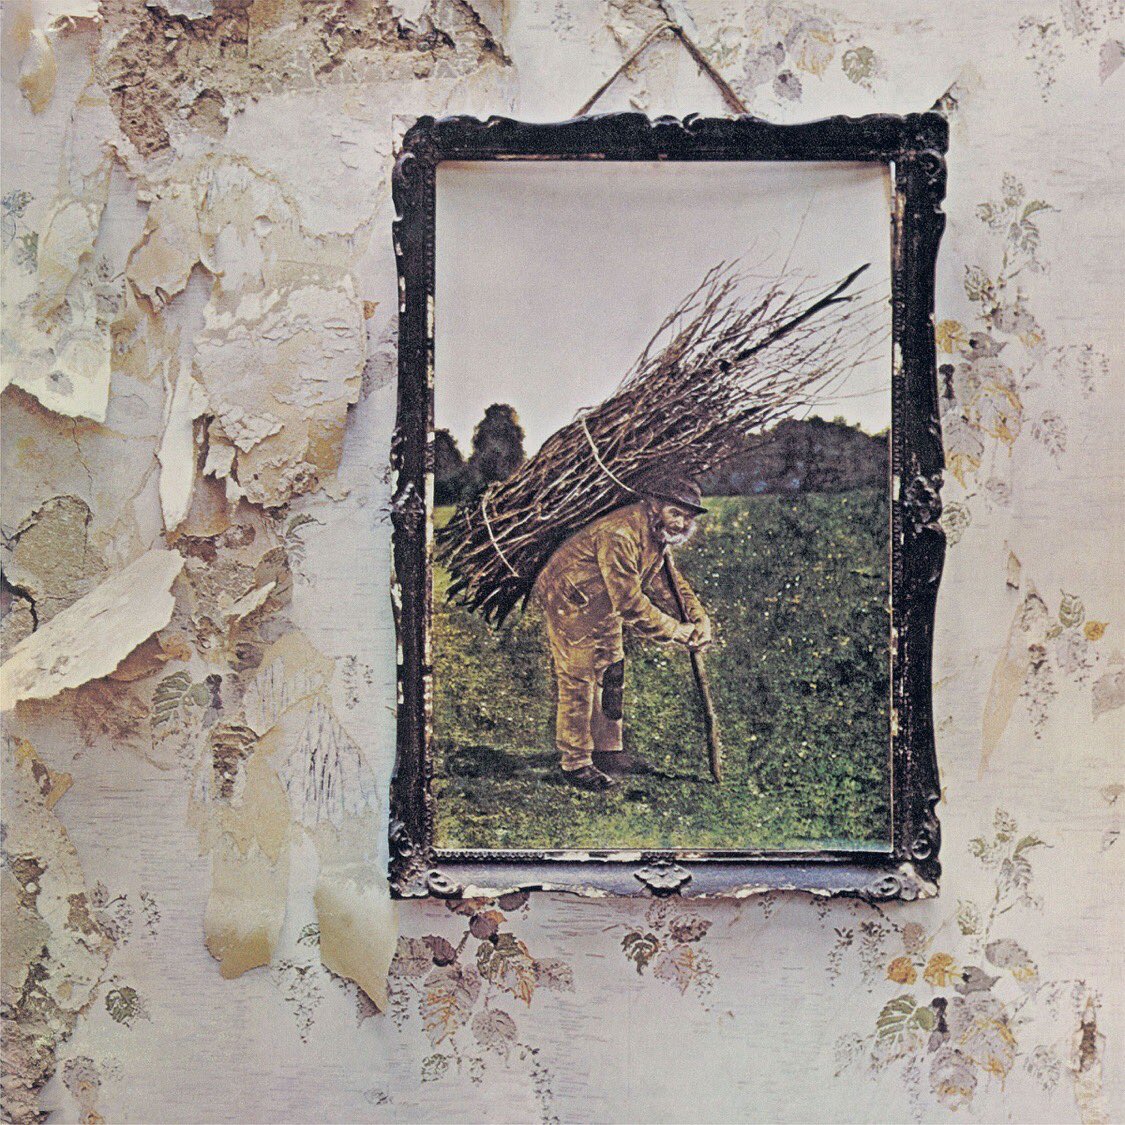 #Nowplaying When the Levee Breaks - Led Zeppelin (Led Zeppelin IV (Remastered)) youtube.com/results?q=When…